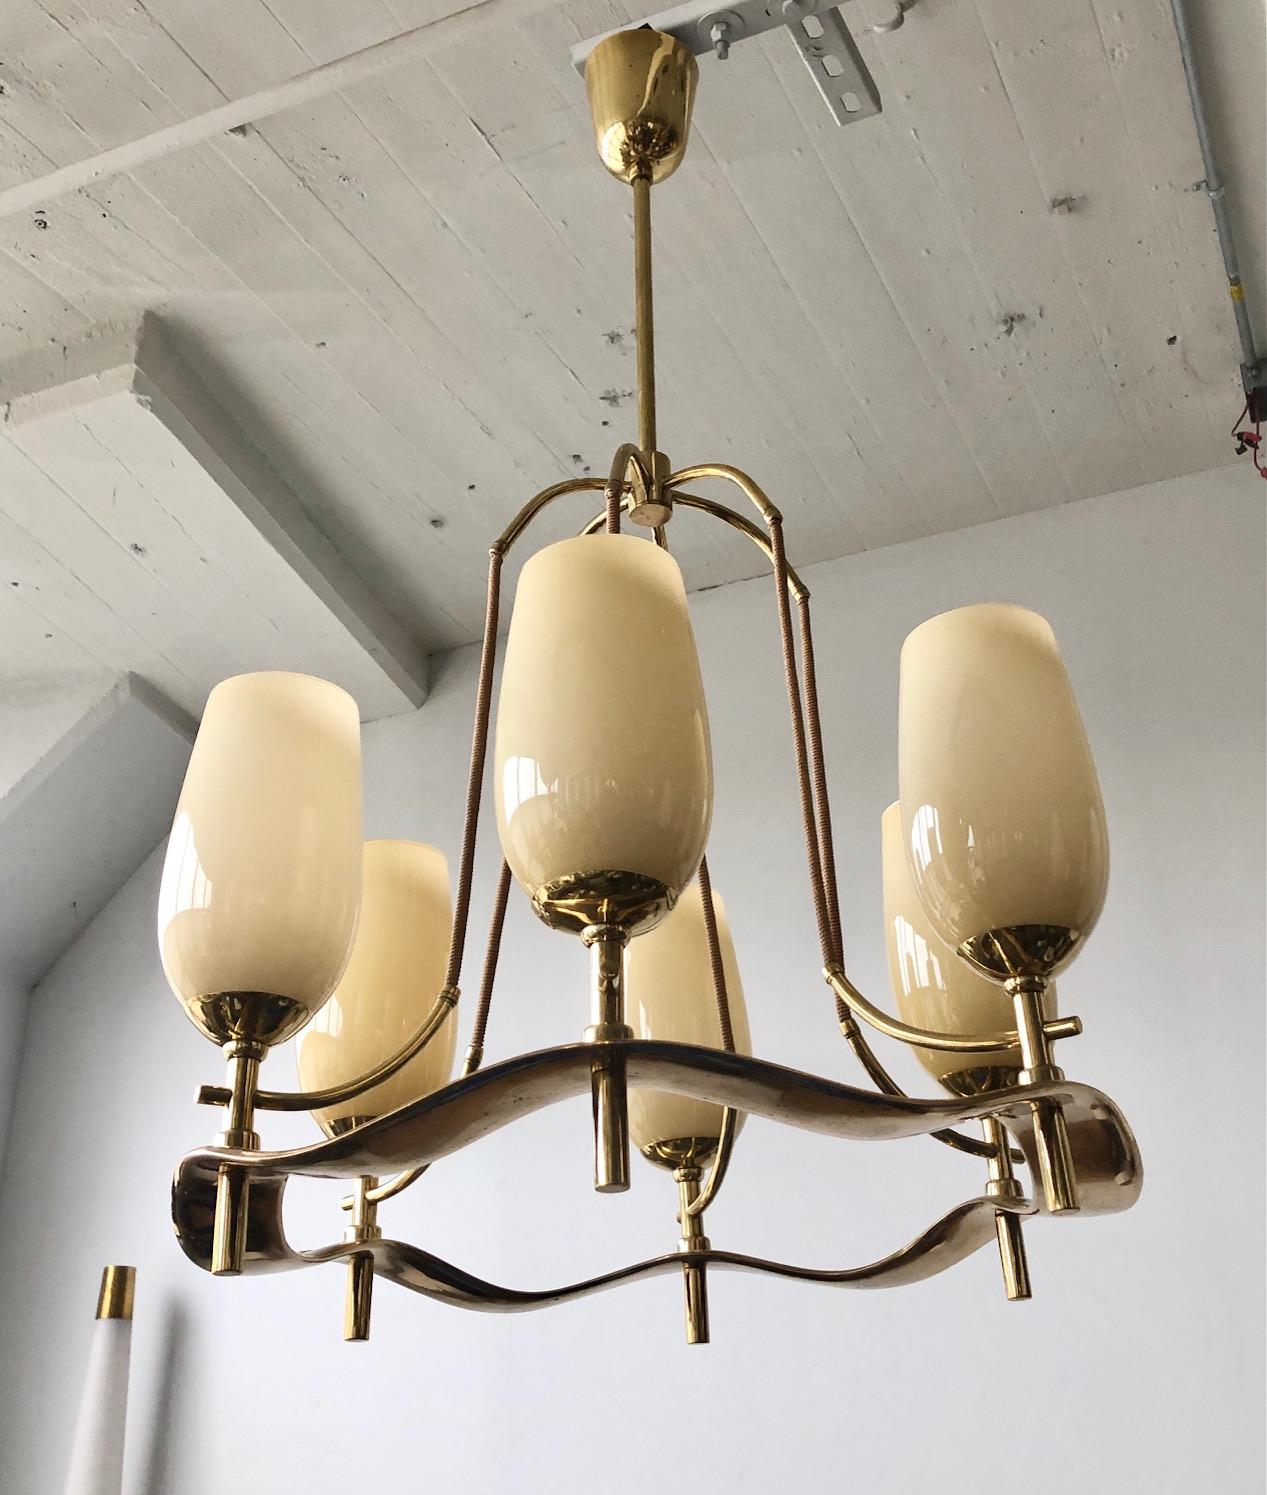 Custom order chandelier designed by Pave Tynell for Taito Oy, Finland, circa 1940s.
Waved cast brass ring with 6 opaline glass shades lights. Marked Taito.
Rewiring available upon request.